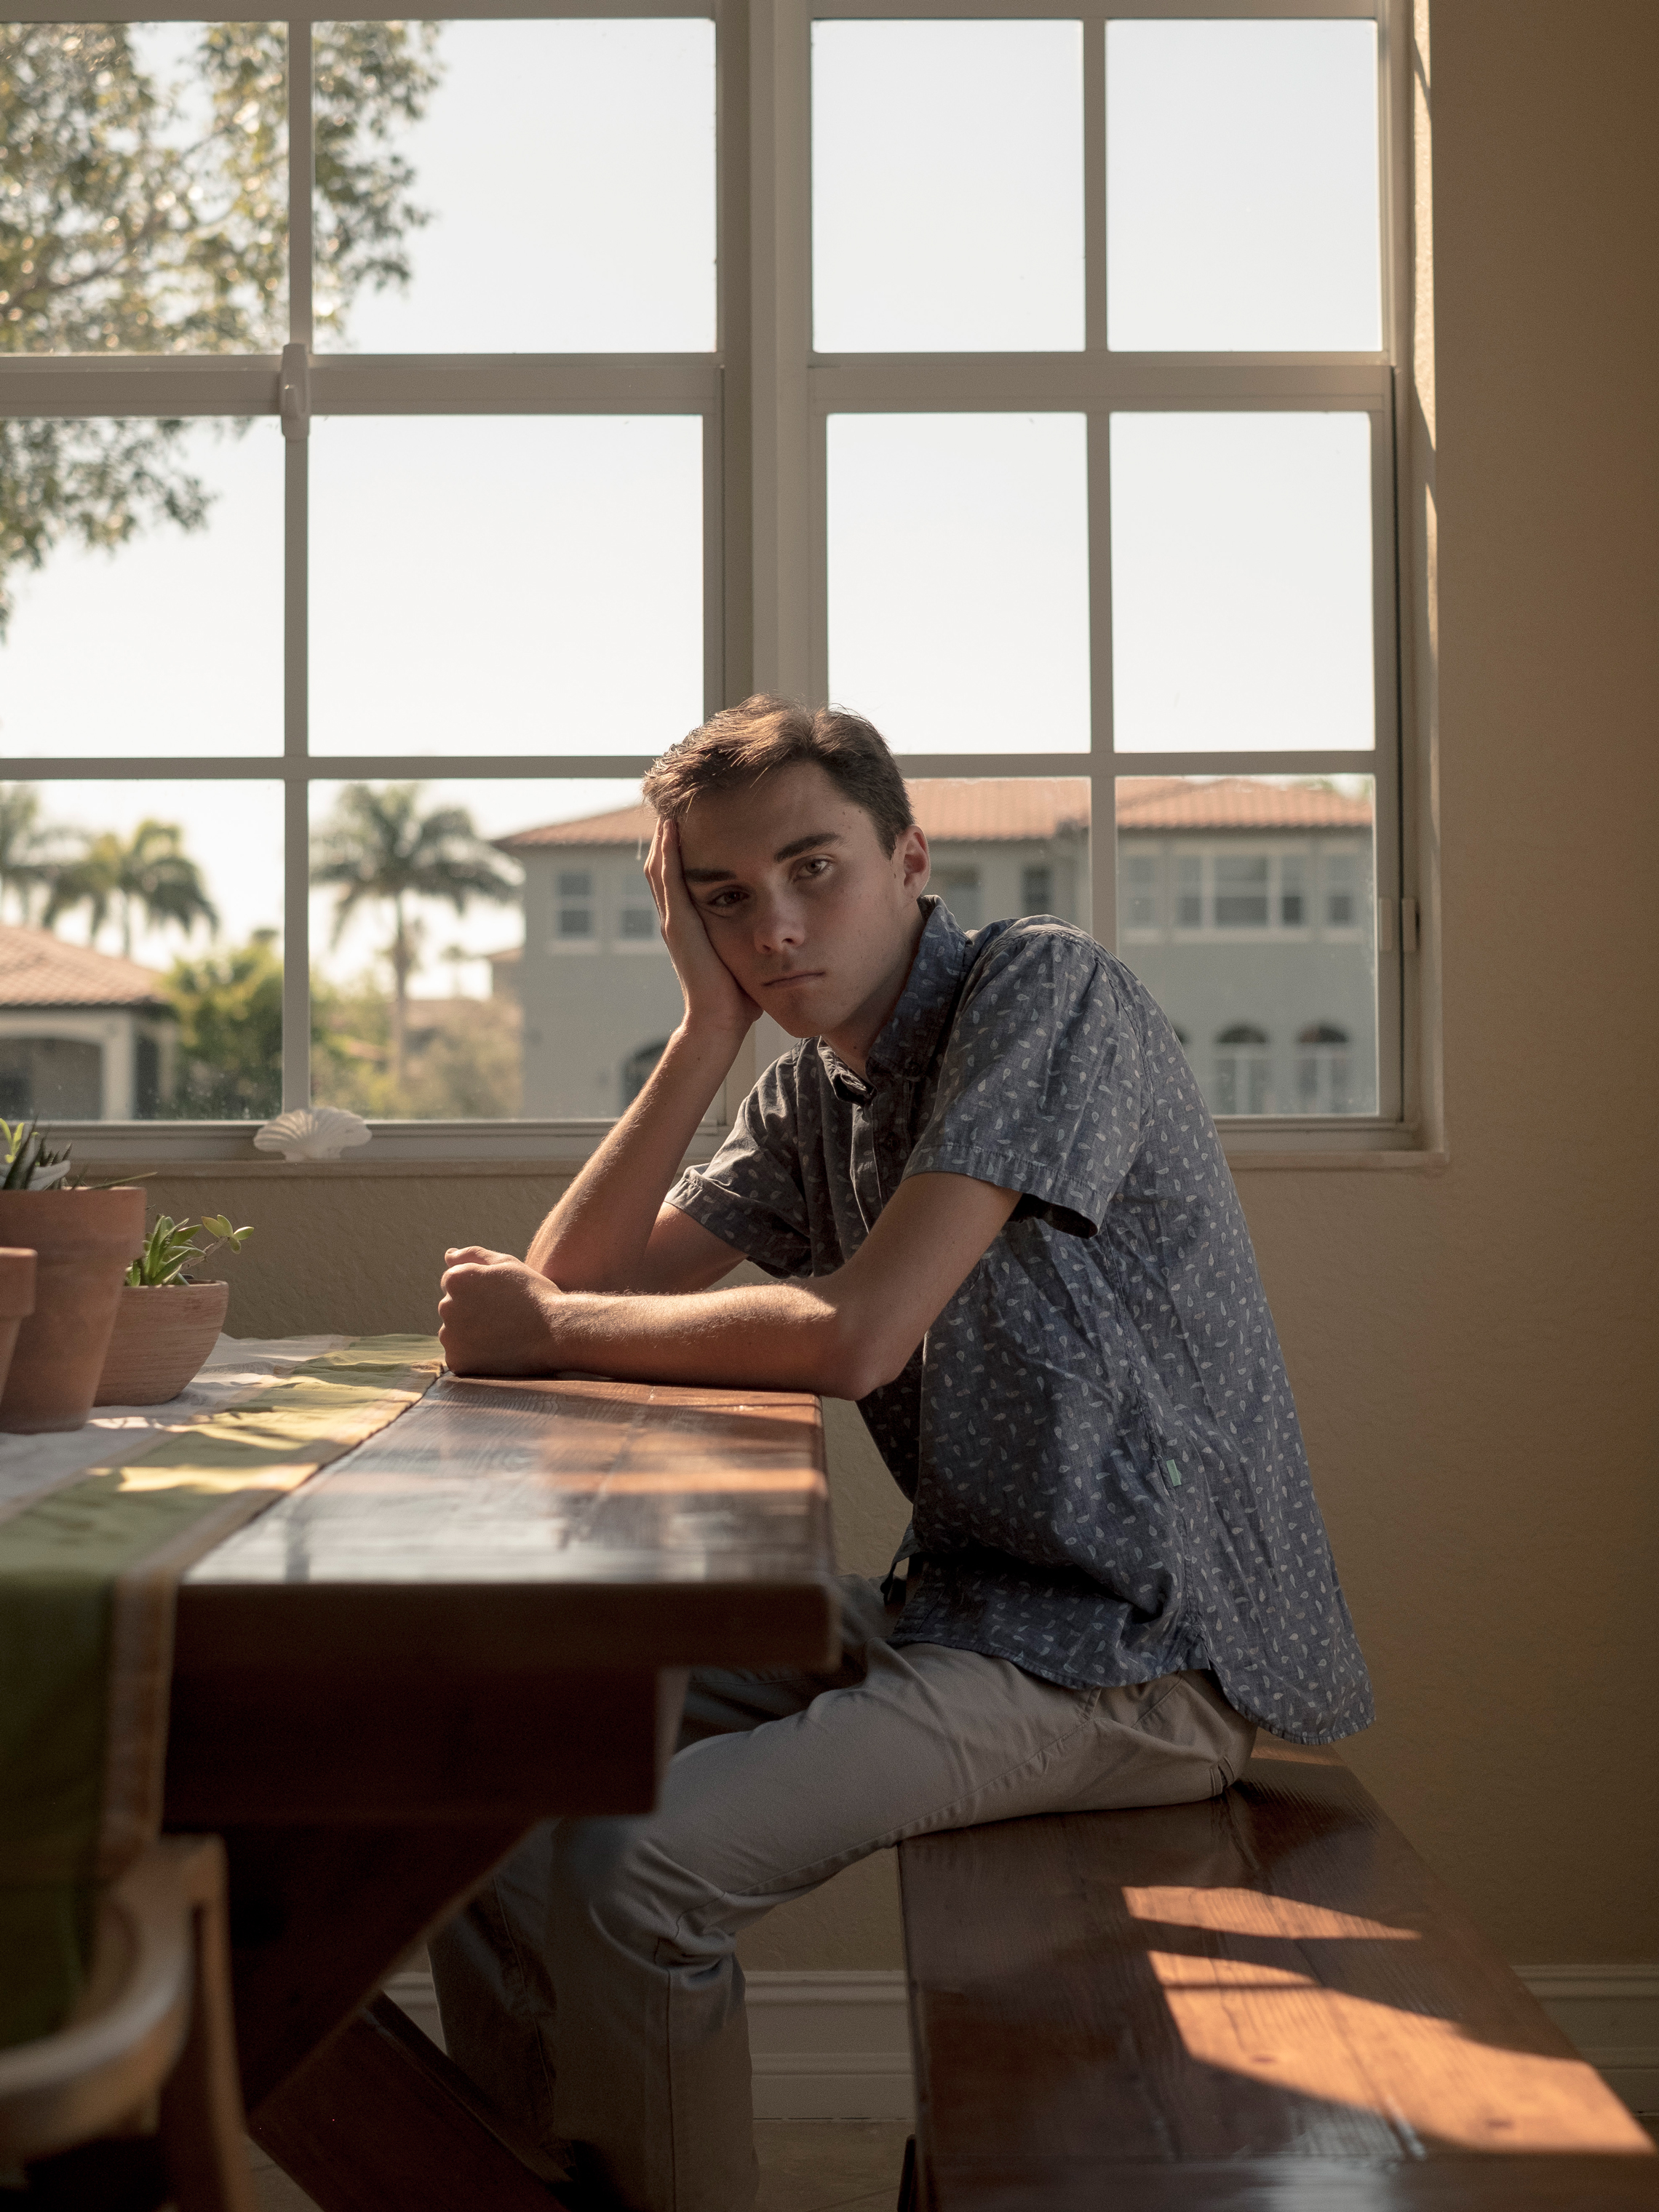 David Hogg at his home in Parkland. (Gabriella Demczuk for TIME)